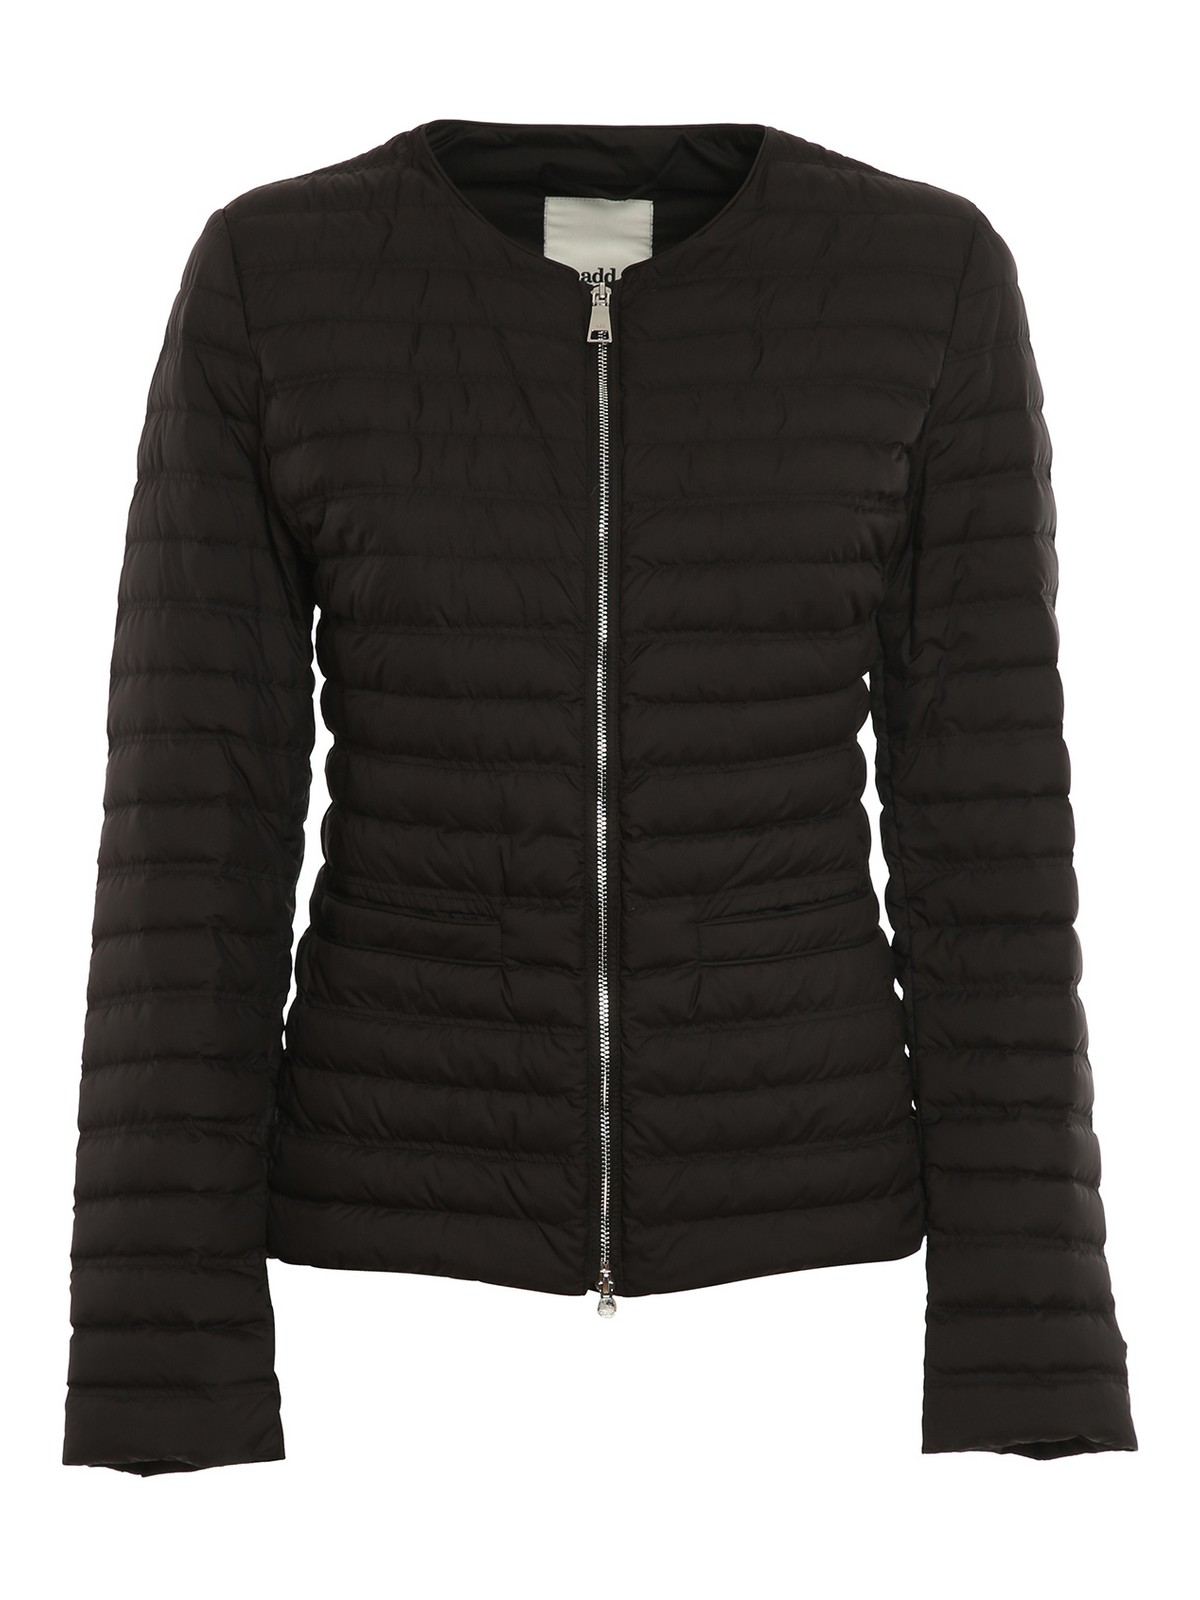 ADD LIGHTWEIGHT PADDED JACKET WITH ZIP